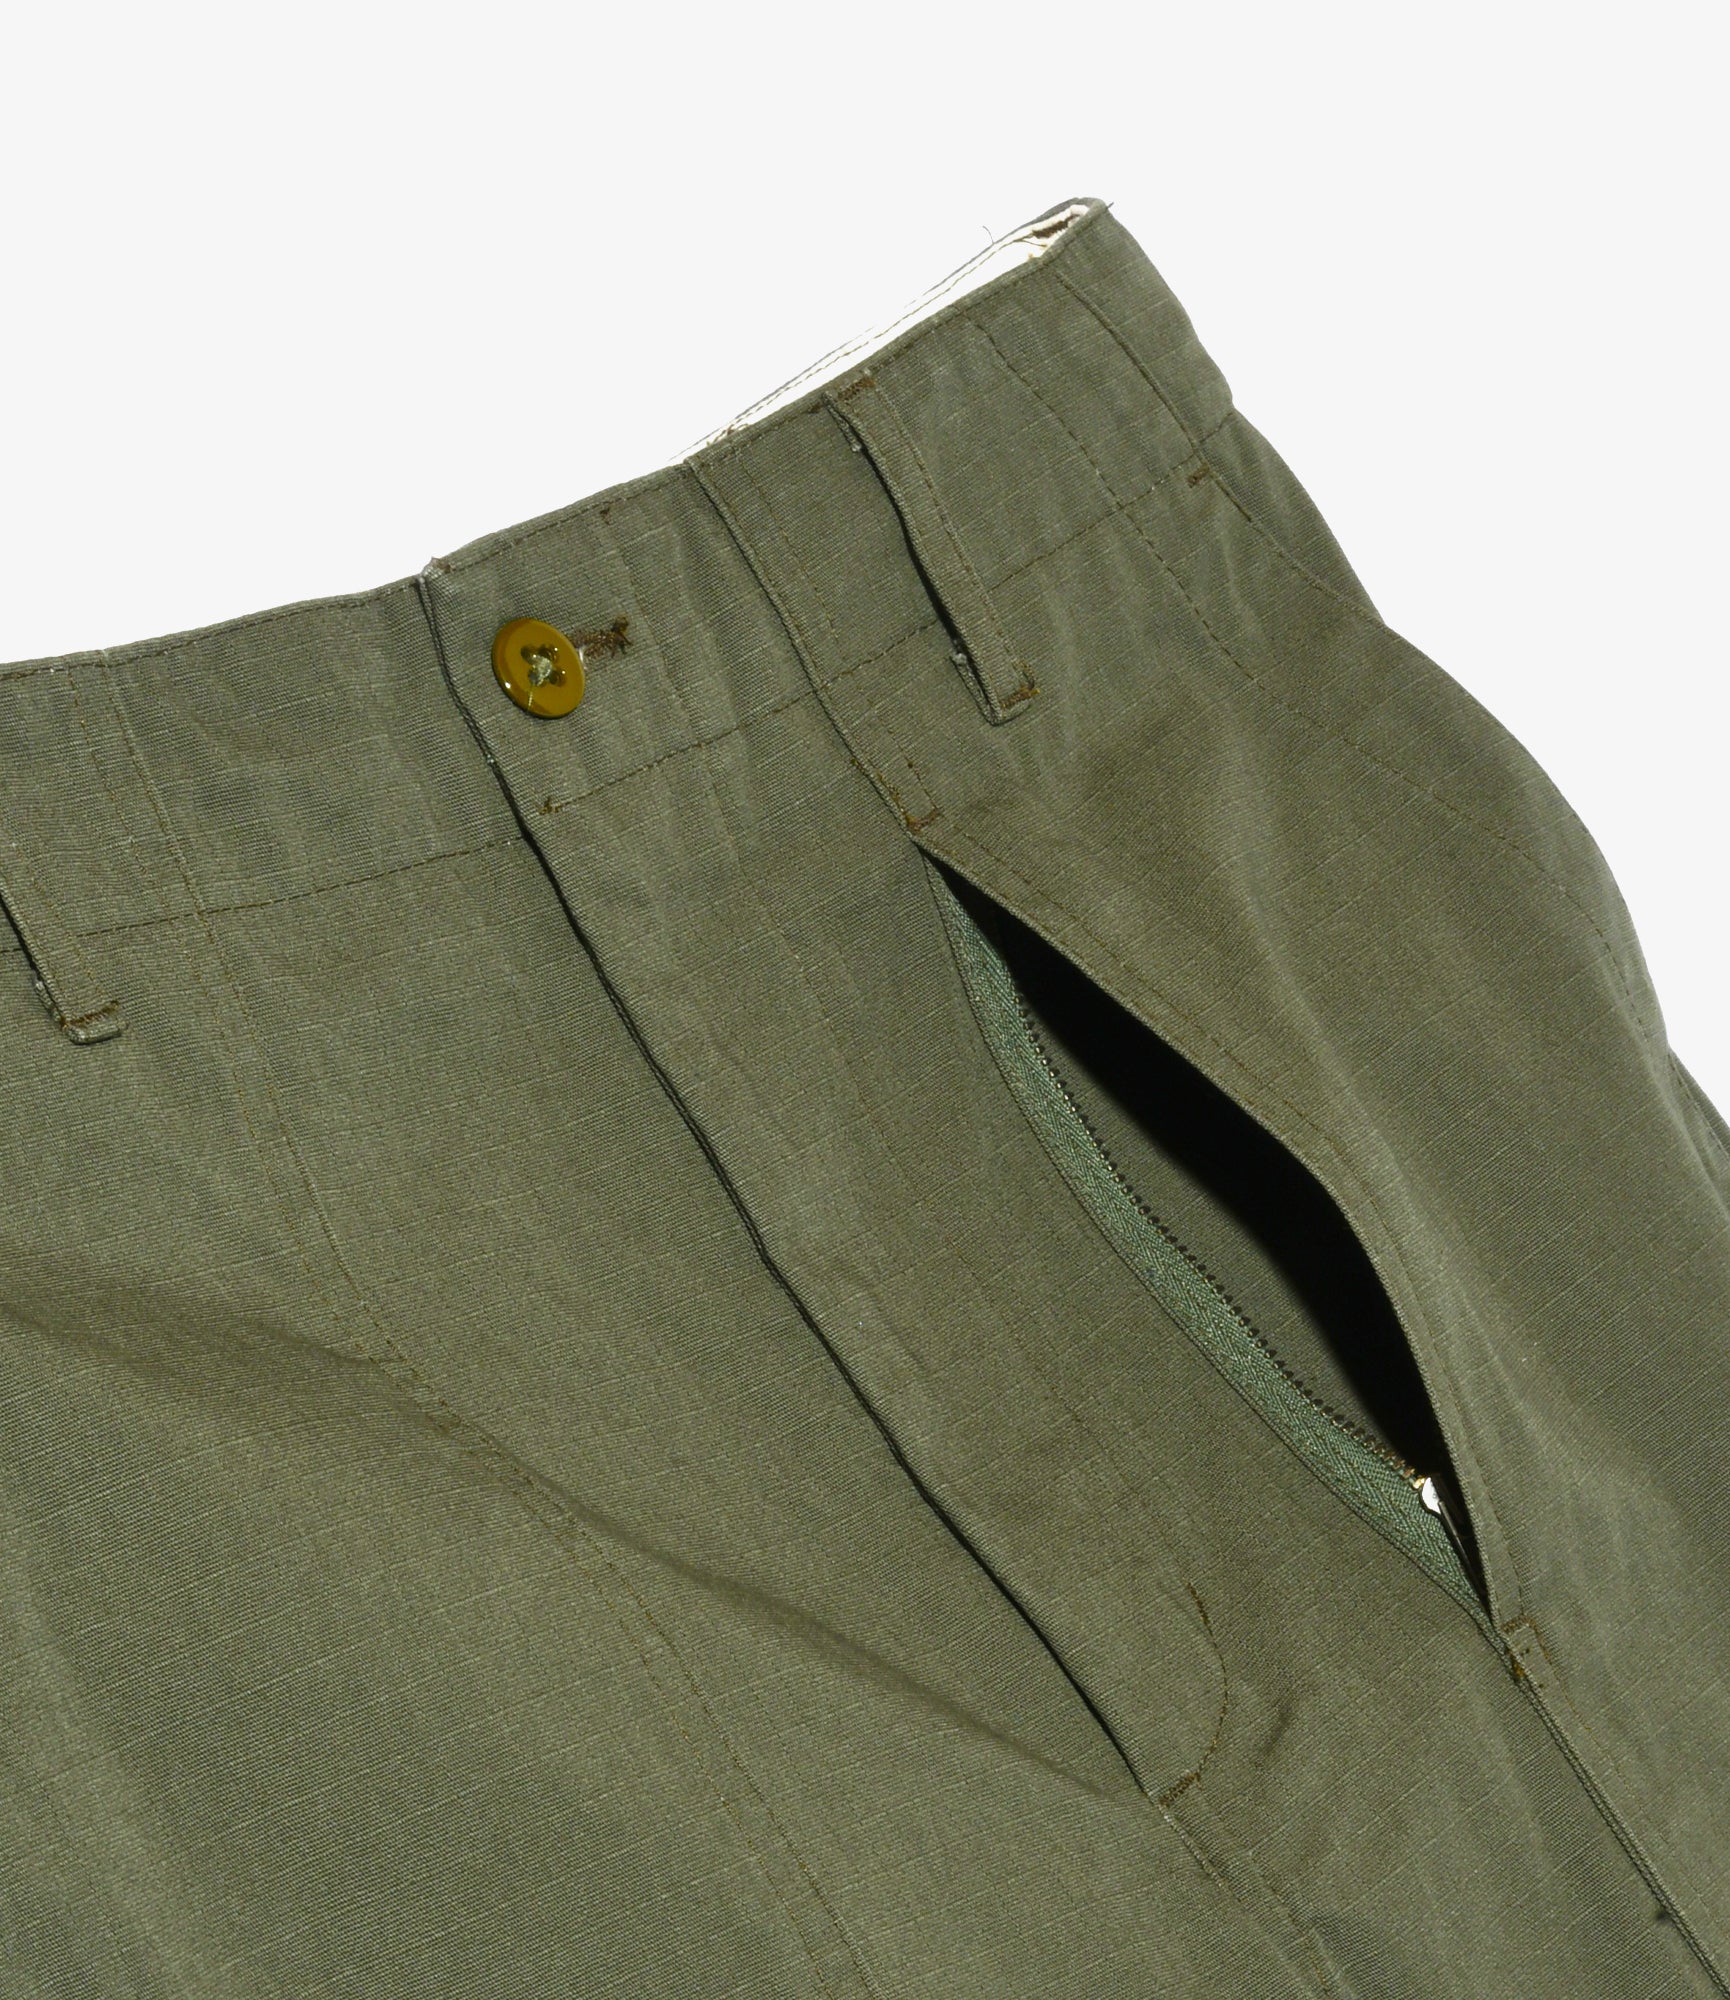 Engineered Garments Fatigue Pant - Olive Heavyweight Cotton Ripstop